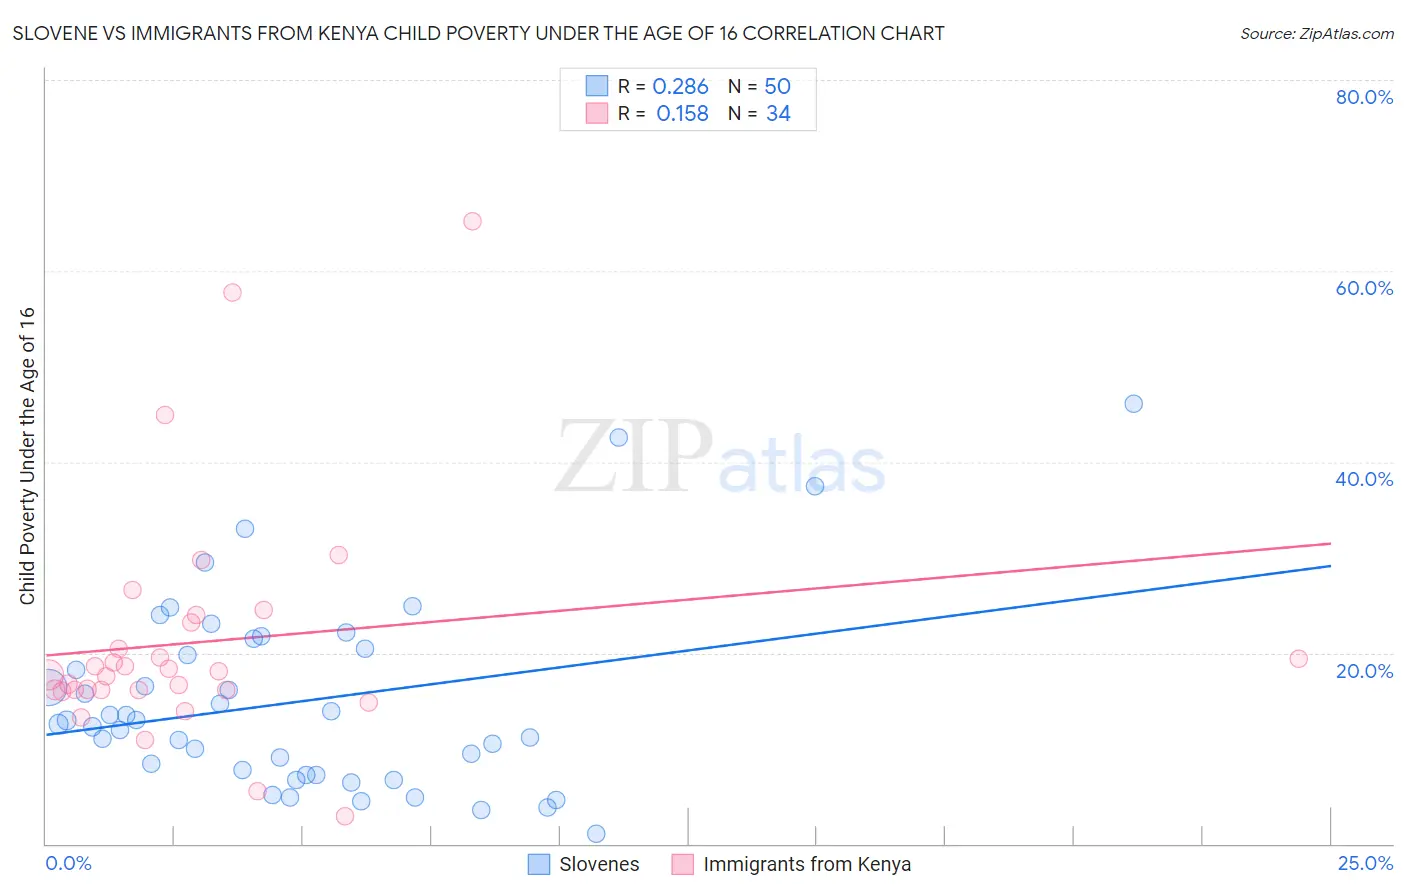 Slovene vs Immigrants from Kenya Child Poverty Under the Age of 16